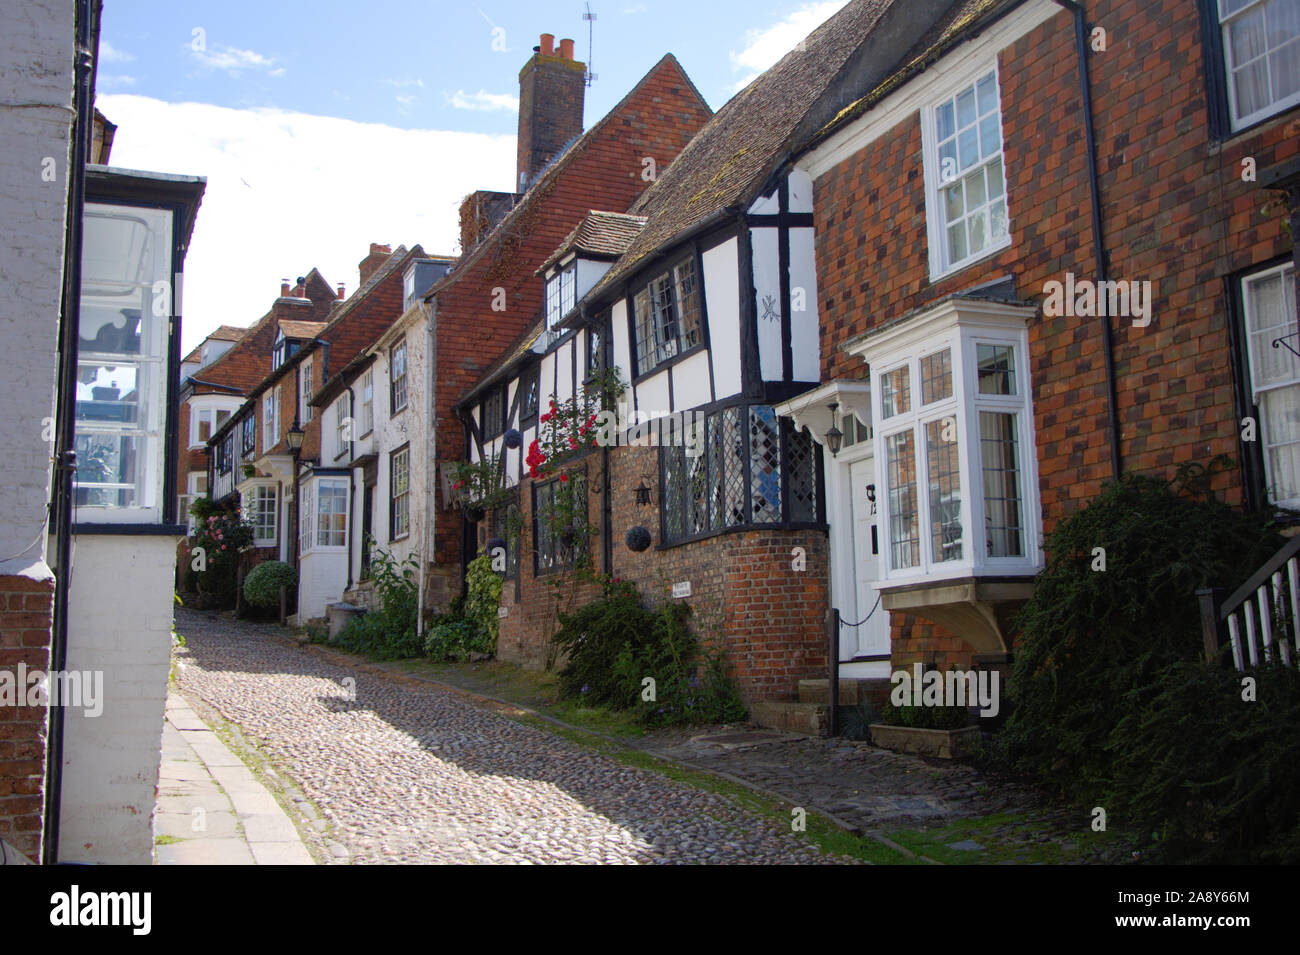 Mermaid street con vecchie case in Rye old town center. Foto Stock